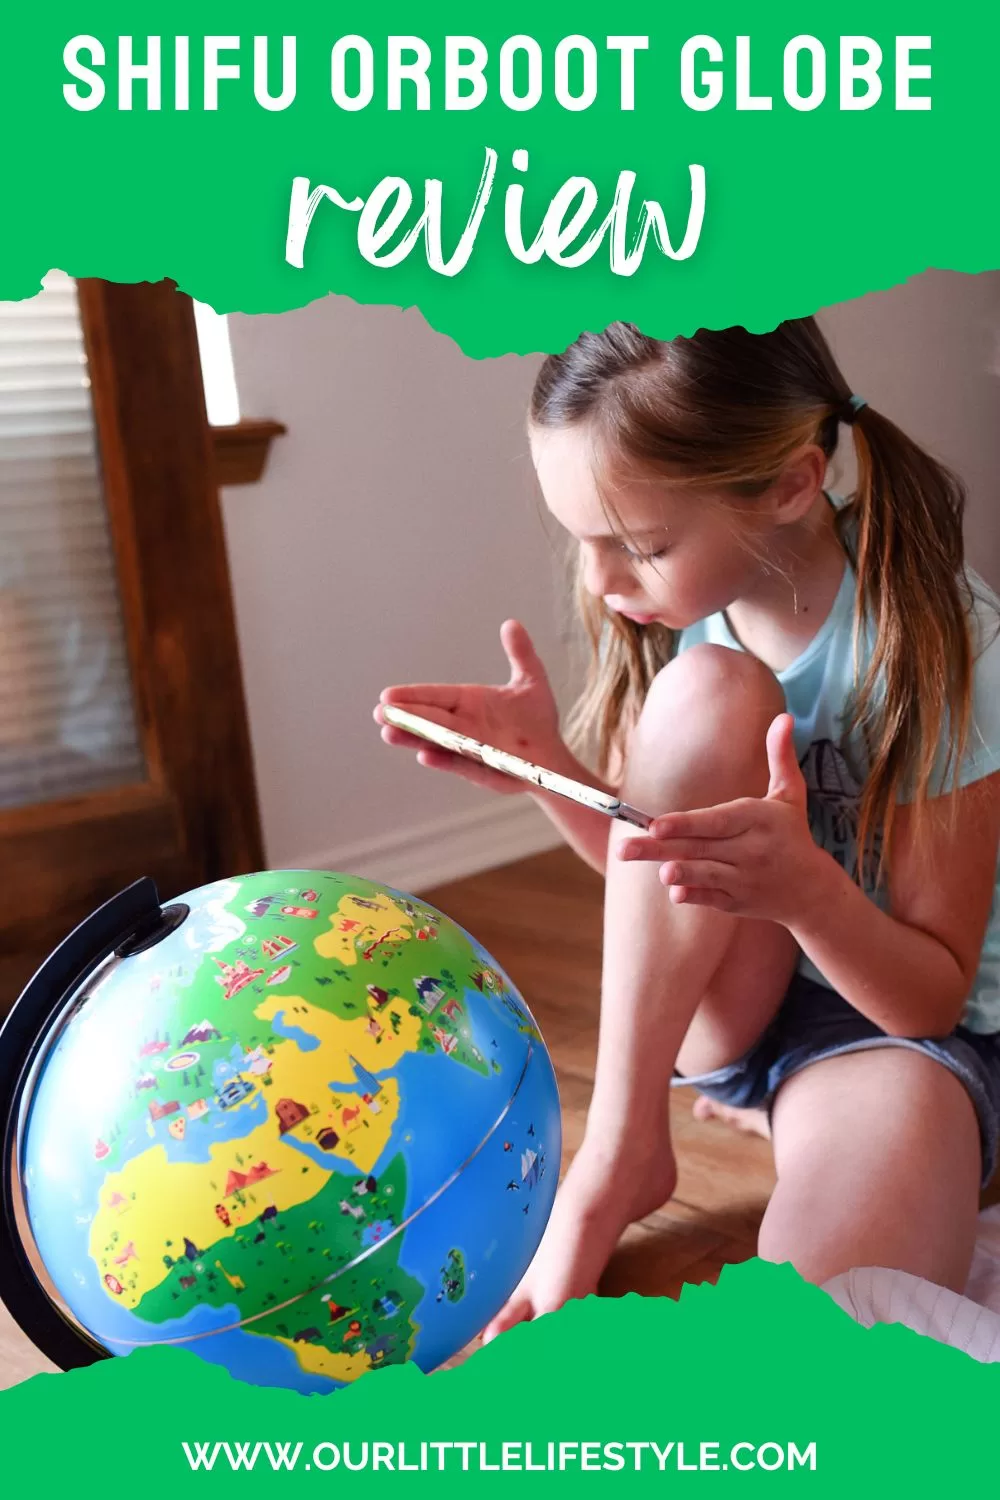 image shows a girl looking at the Orboot Educational Globe and the caption reads "Shifu Orboot Globe Review"